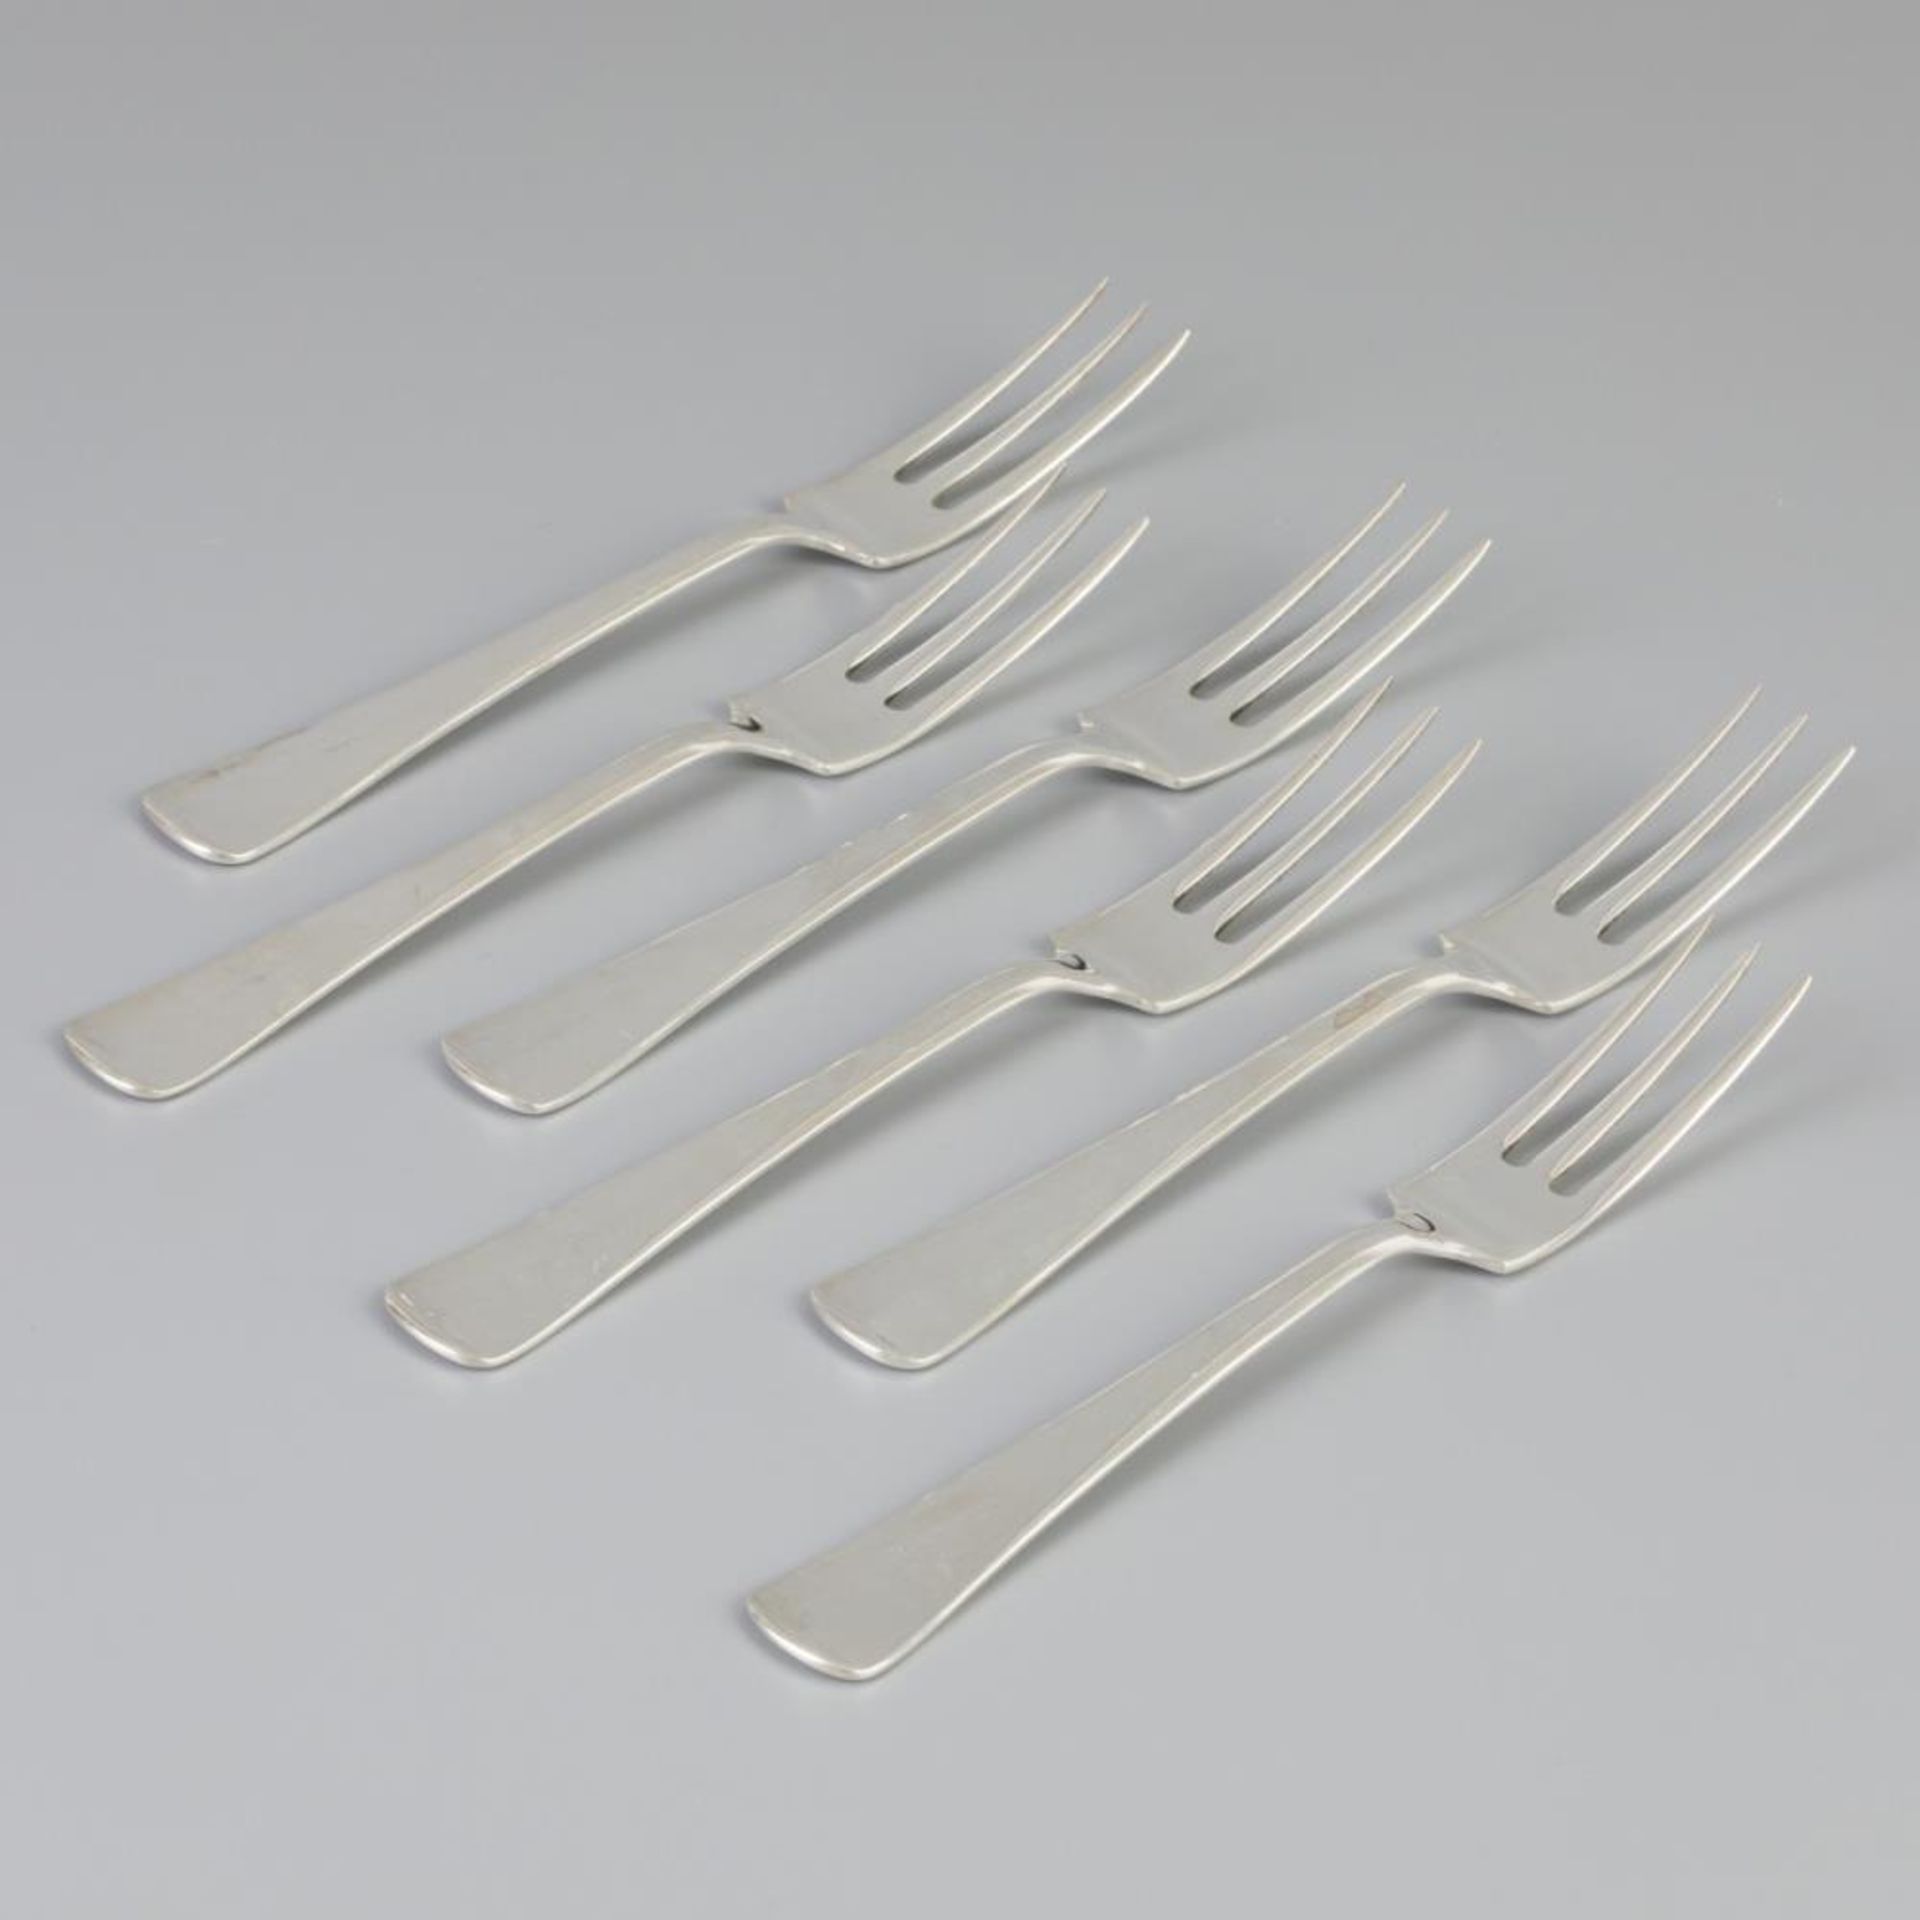 6 piece set of forks "Haags Lofje" silver.